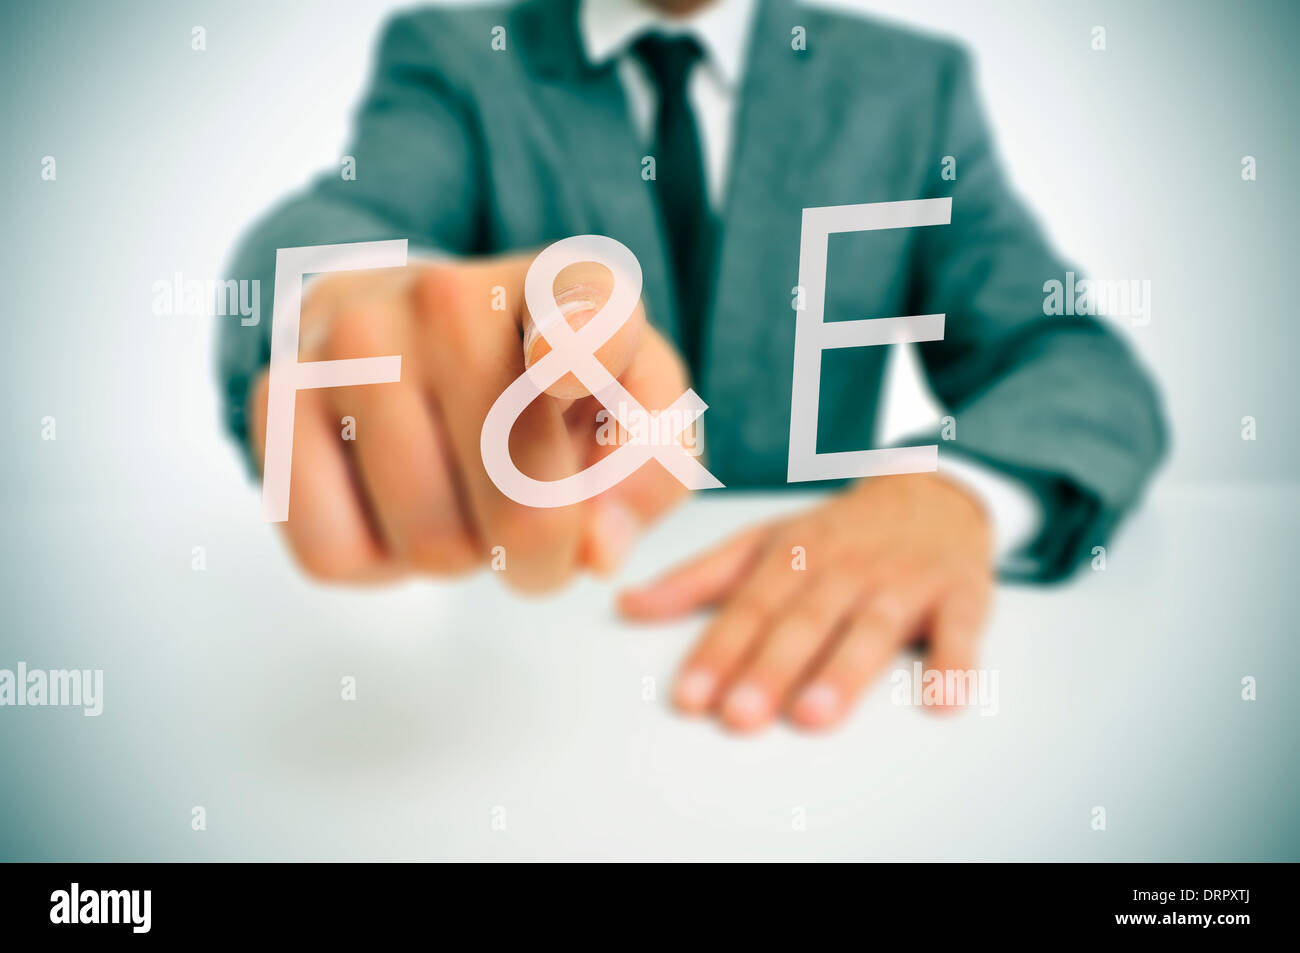 businessman wearing a suit pointing to the term F and E, forschung und entwicklung, research and development in german, written Stock Photo